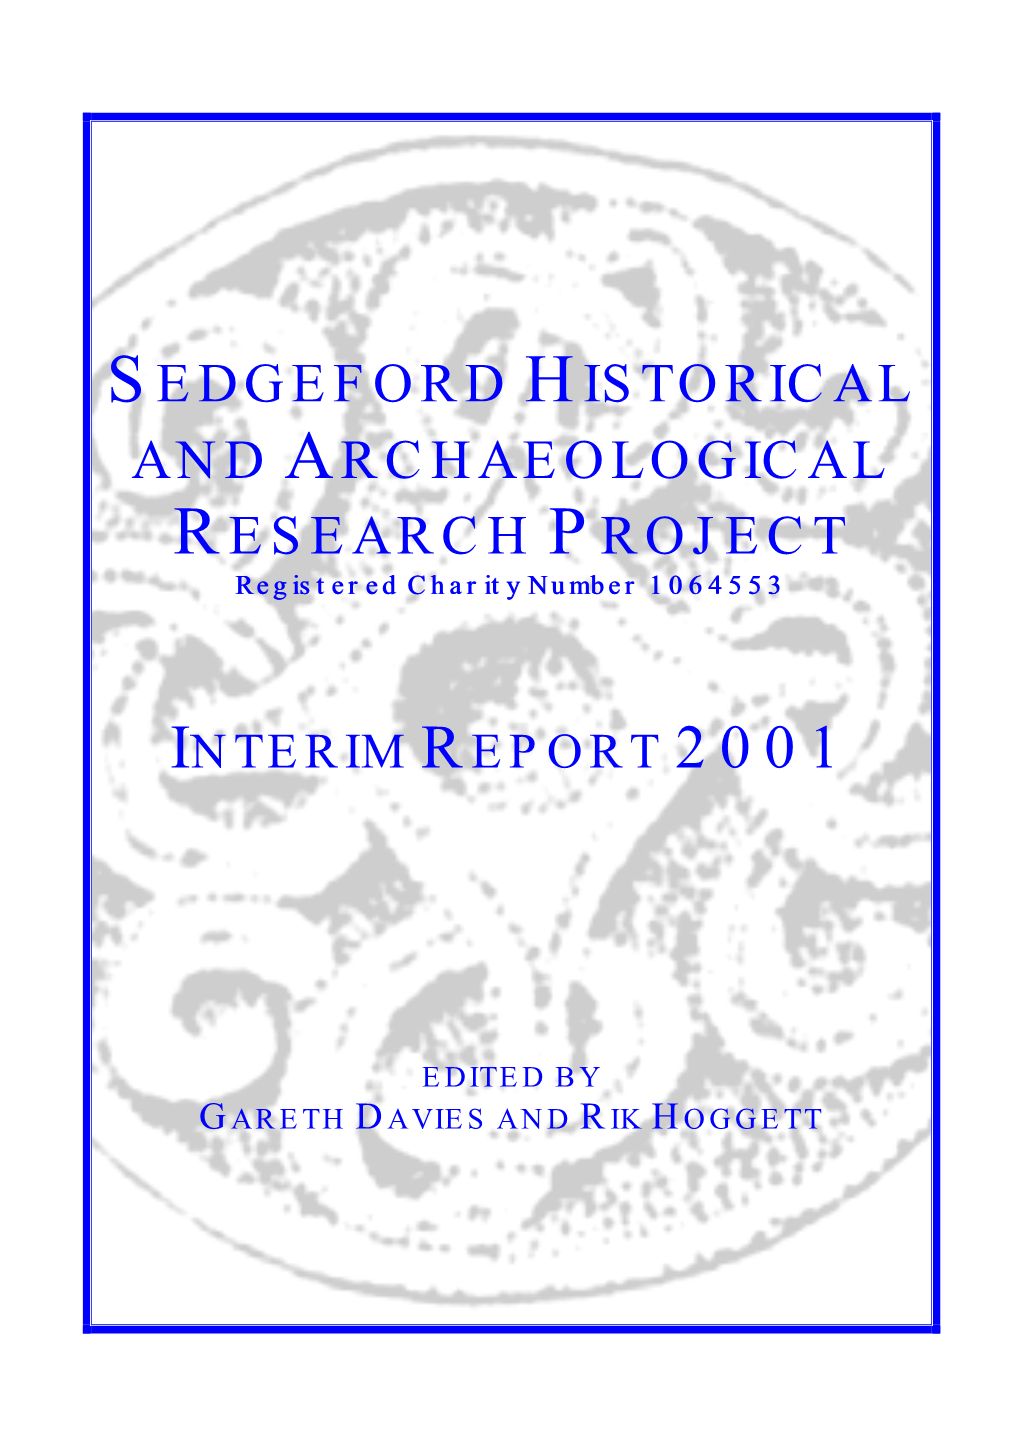 Sedgeford Historical and Archaeological Research Project: Interim Report 2001